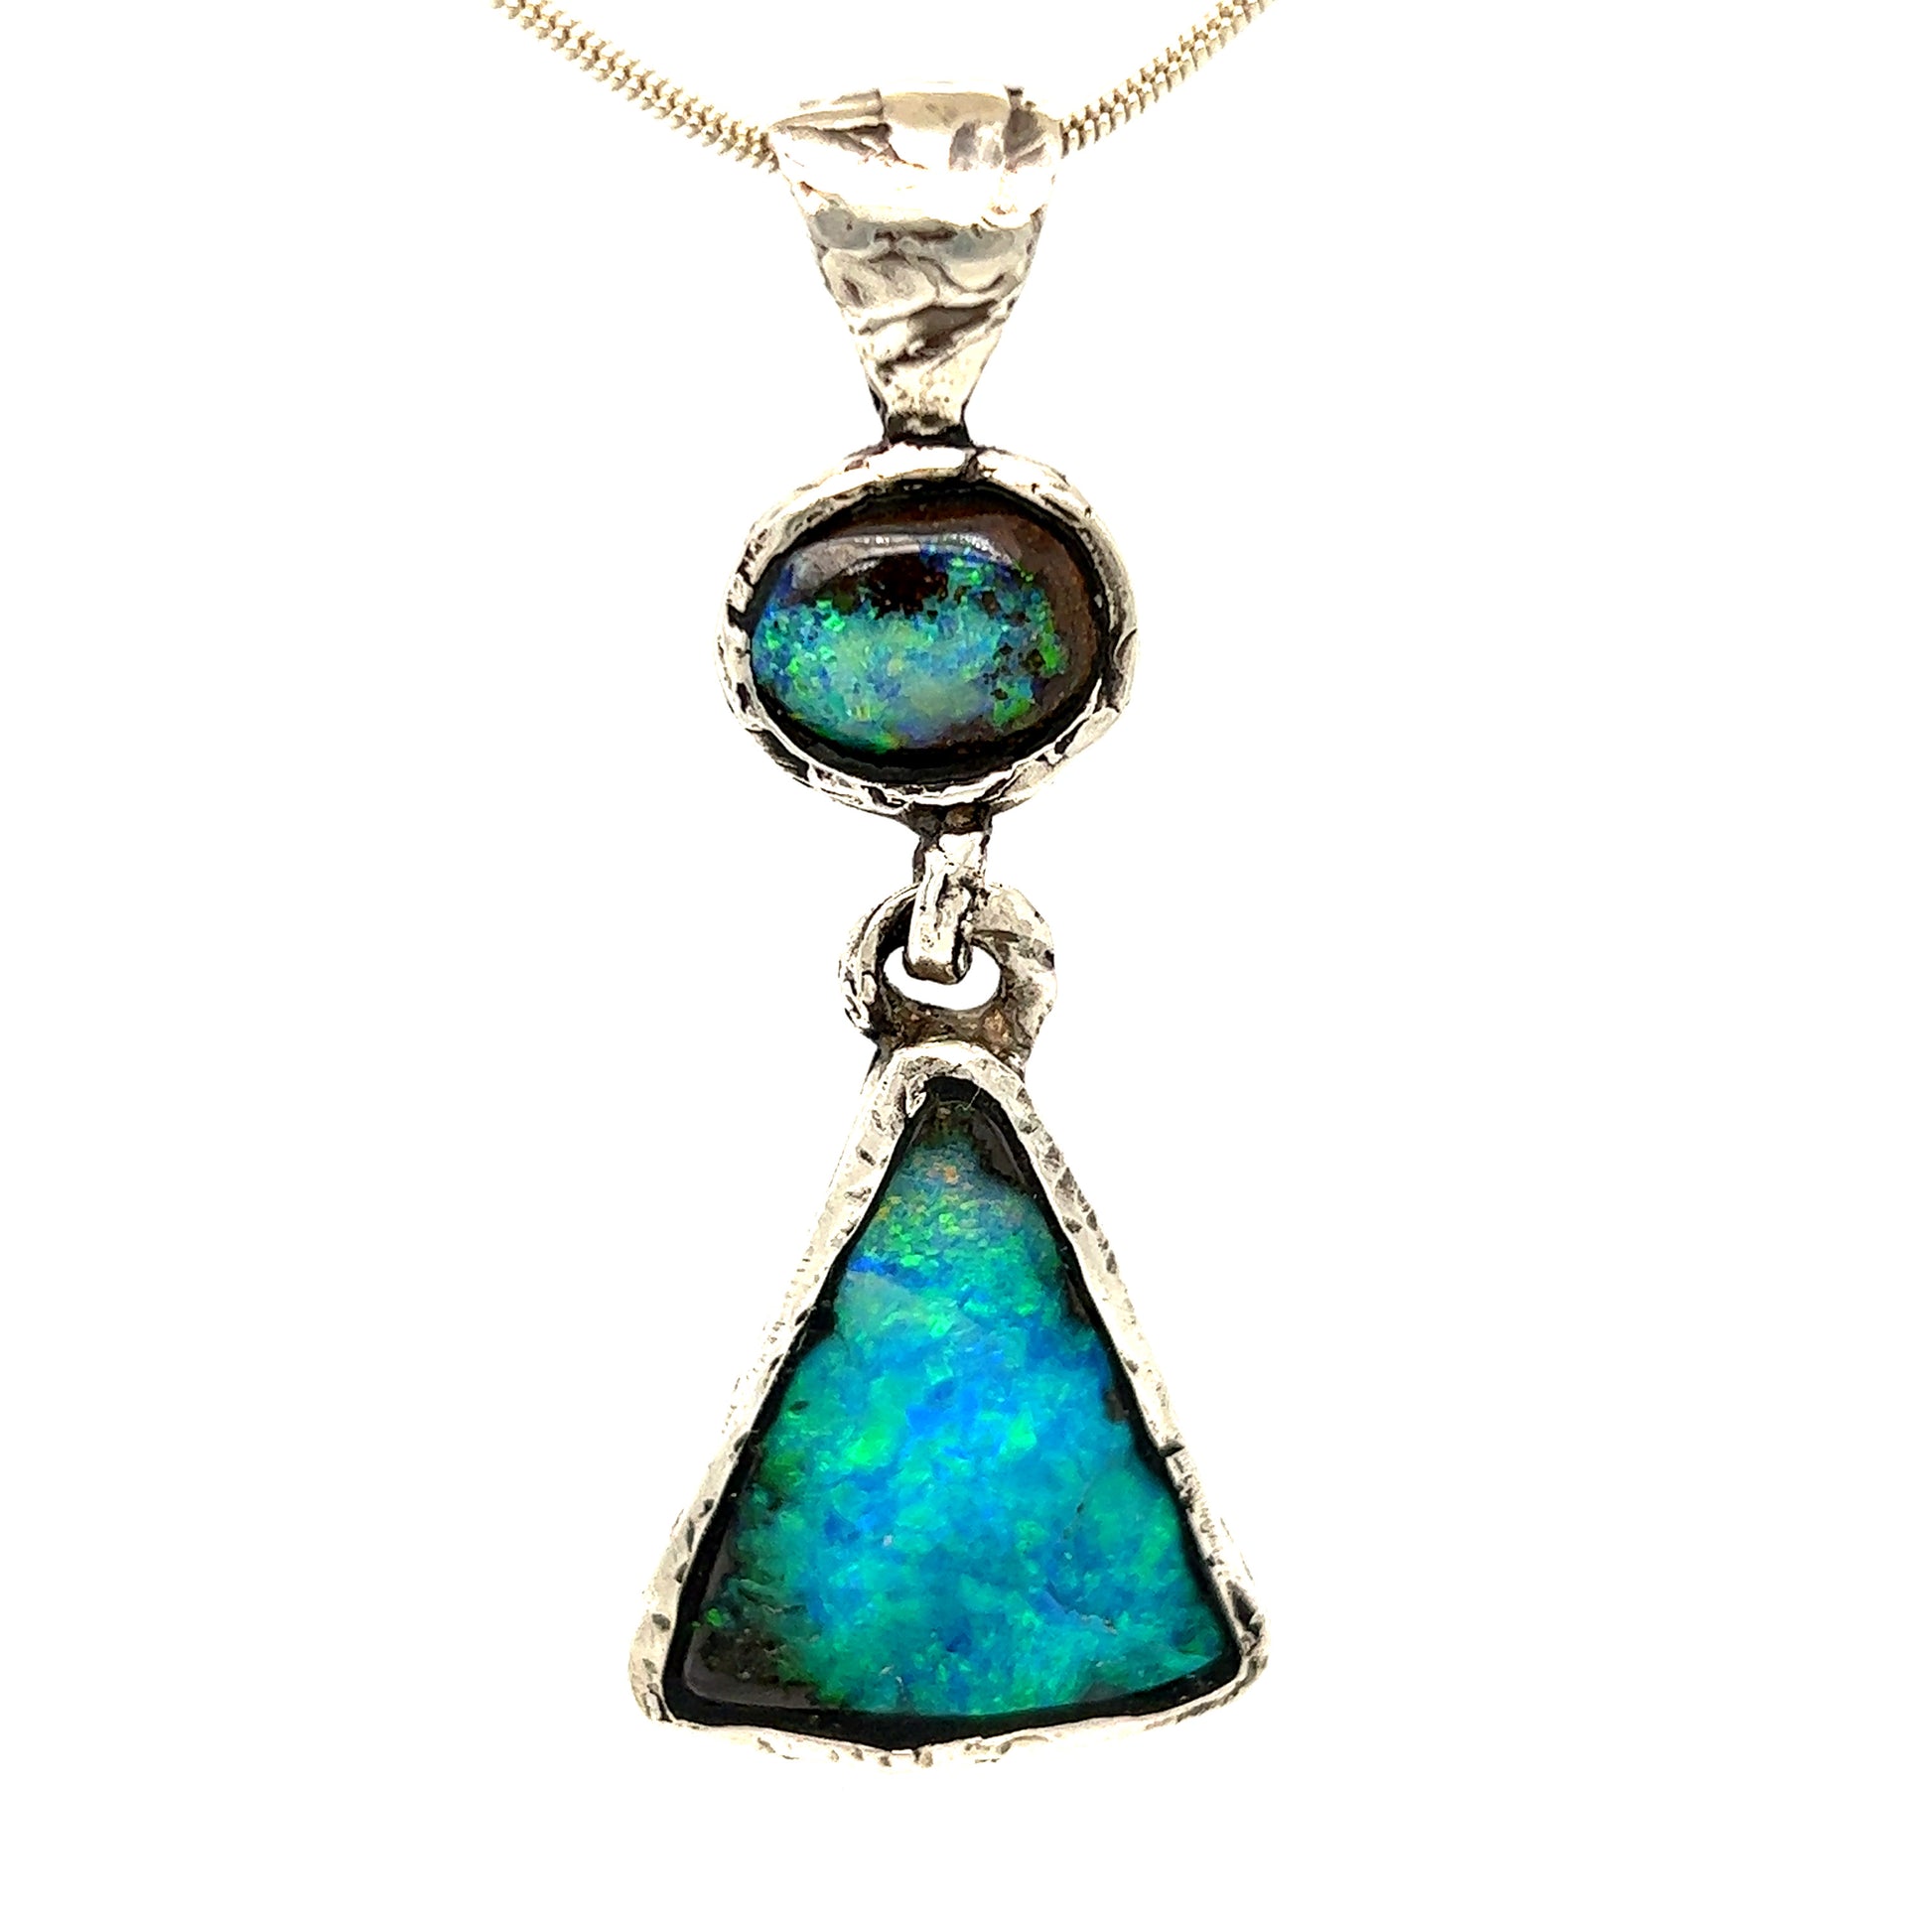 Stunning one-off hand made solid Boulder opal pendant. Hinged between stones to allow movement. Highly textured to enhance rawness.  Made with Argentium silver - a higher silver content using part recycled silver, and a lower allergenic. Crafted by Sally Fisher.